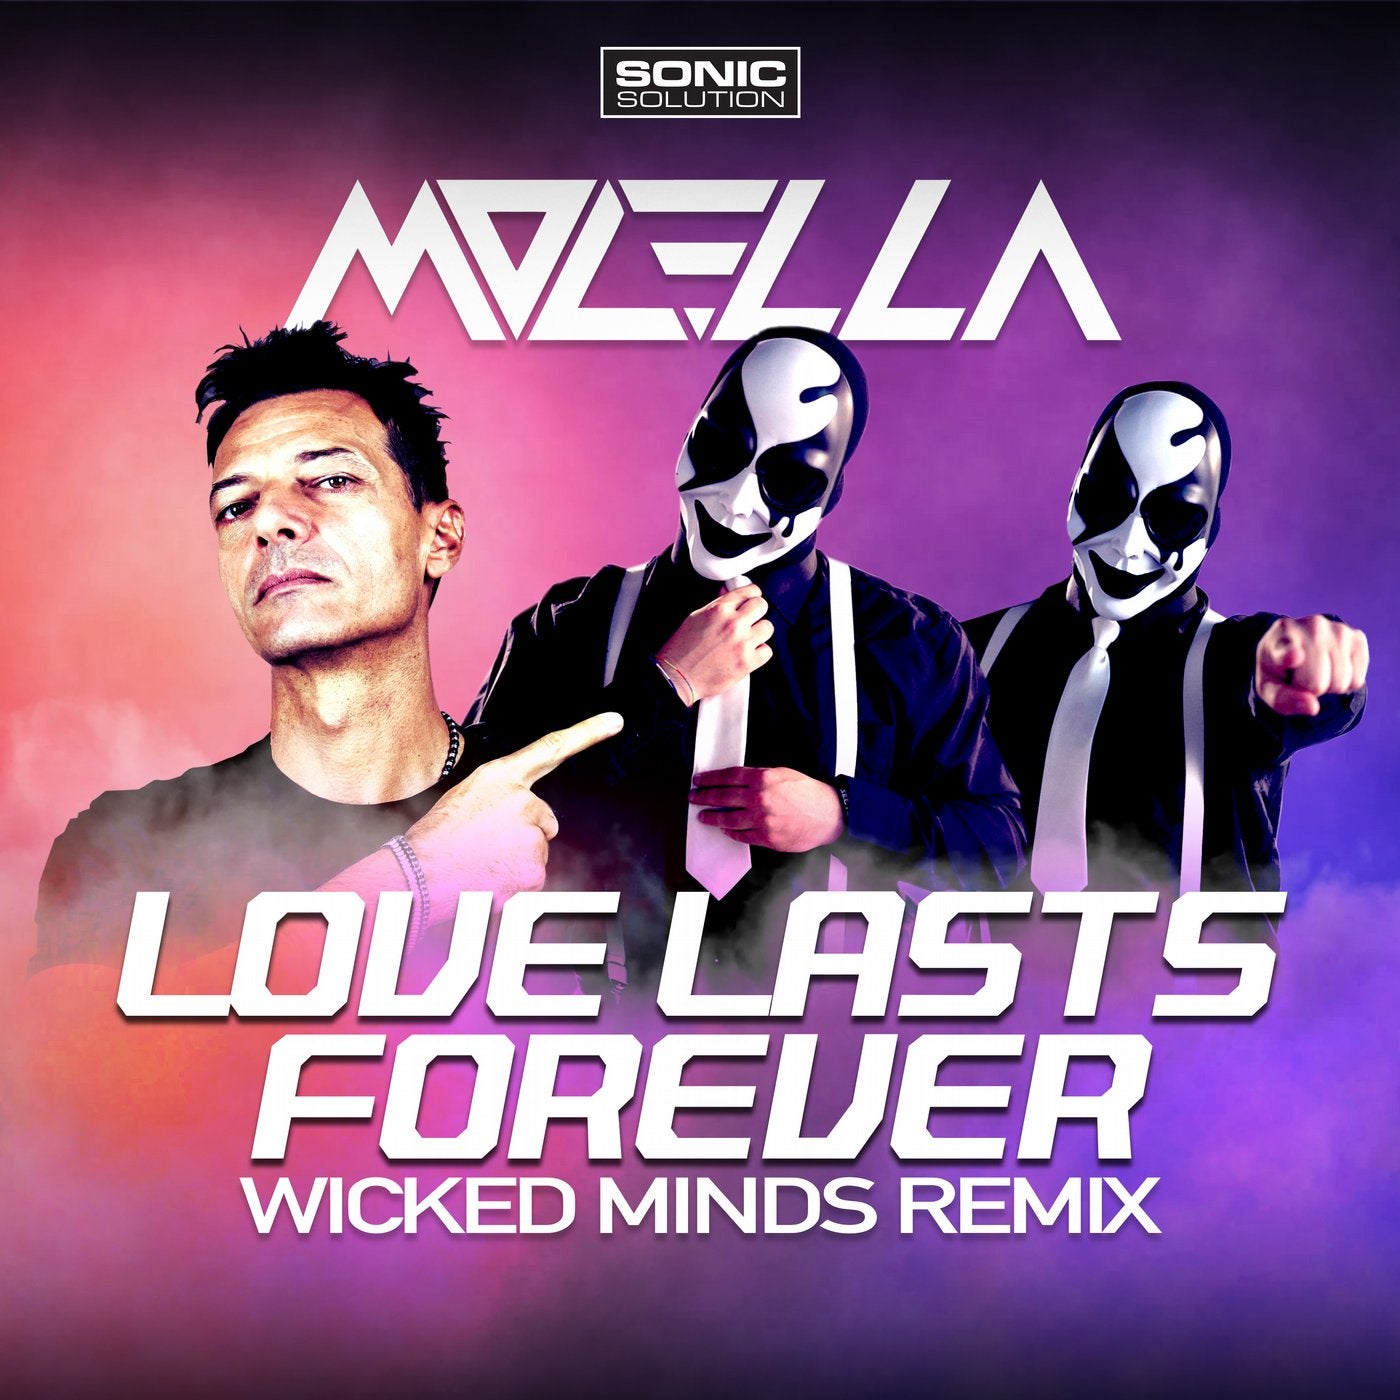 Love lasts forever - Wicked Minds Remix